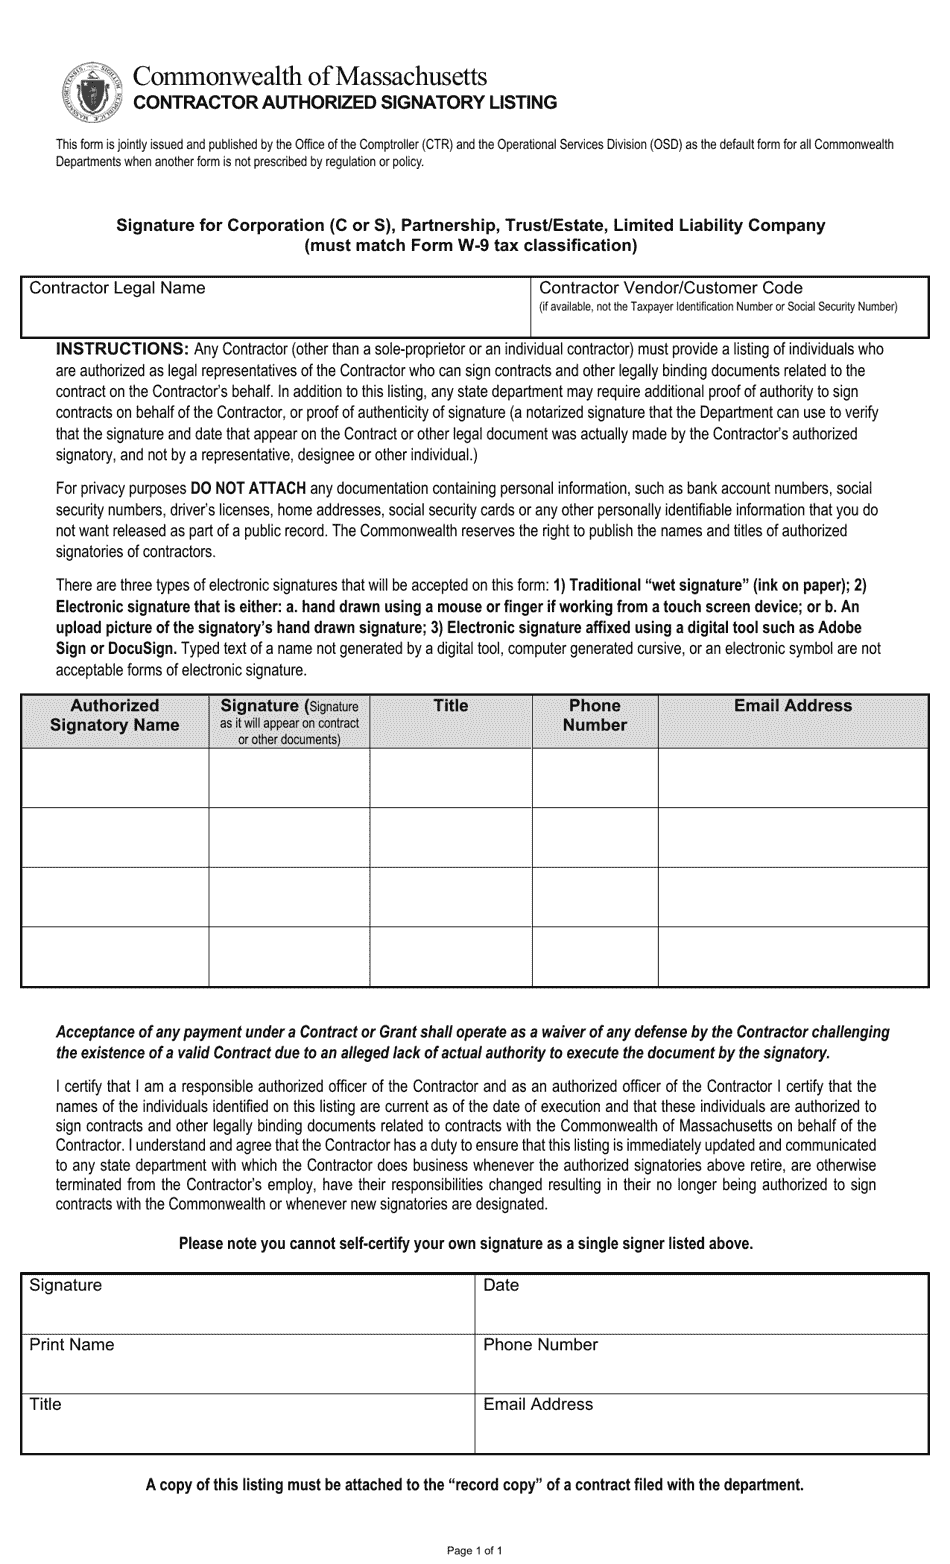 Contractor Authorized Signatory Listing Form (Casl) for Corporations - Massachusetts, Page 1